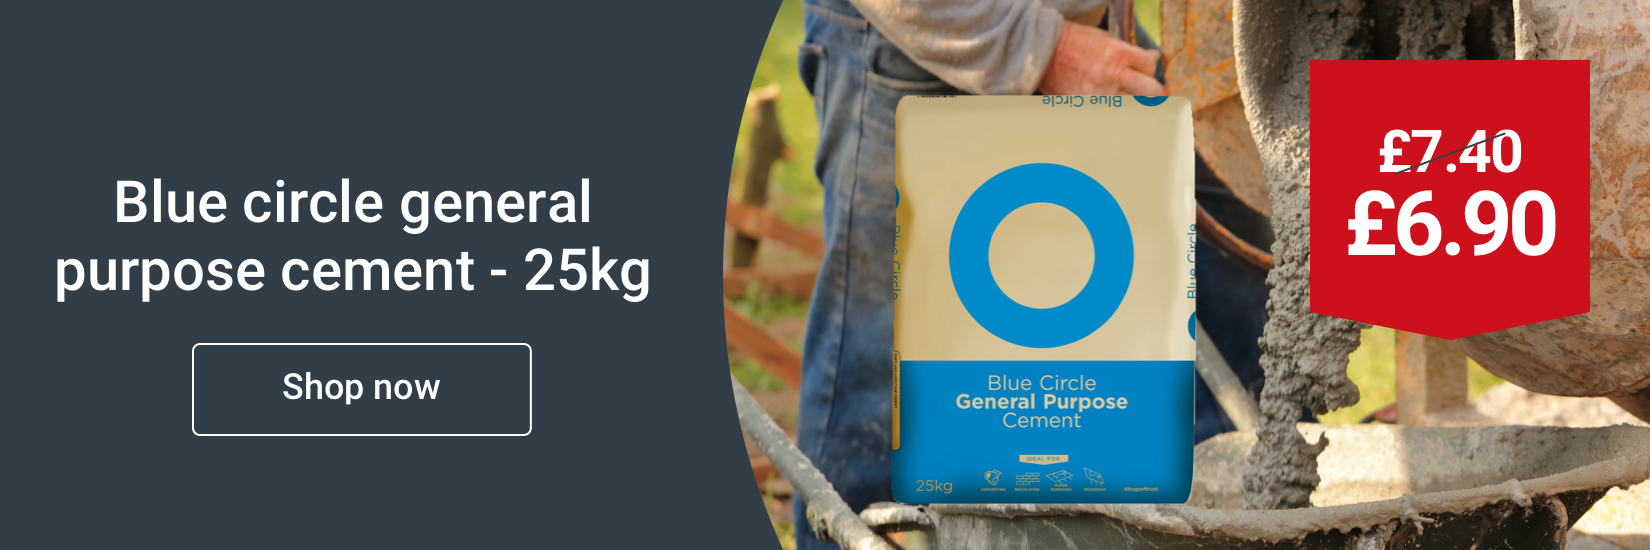 Blue Circle High Strength Ready To Use Concrete (40N) - 20kg | Wickes.co.uk